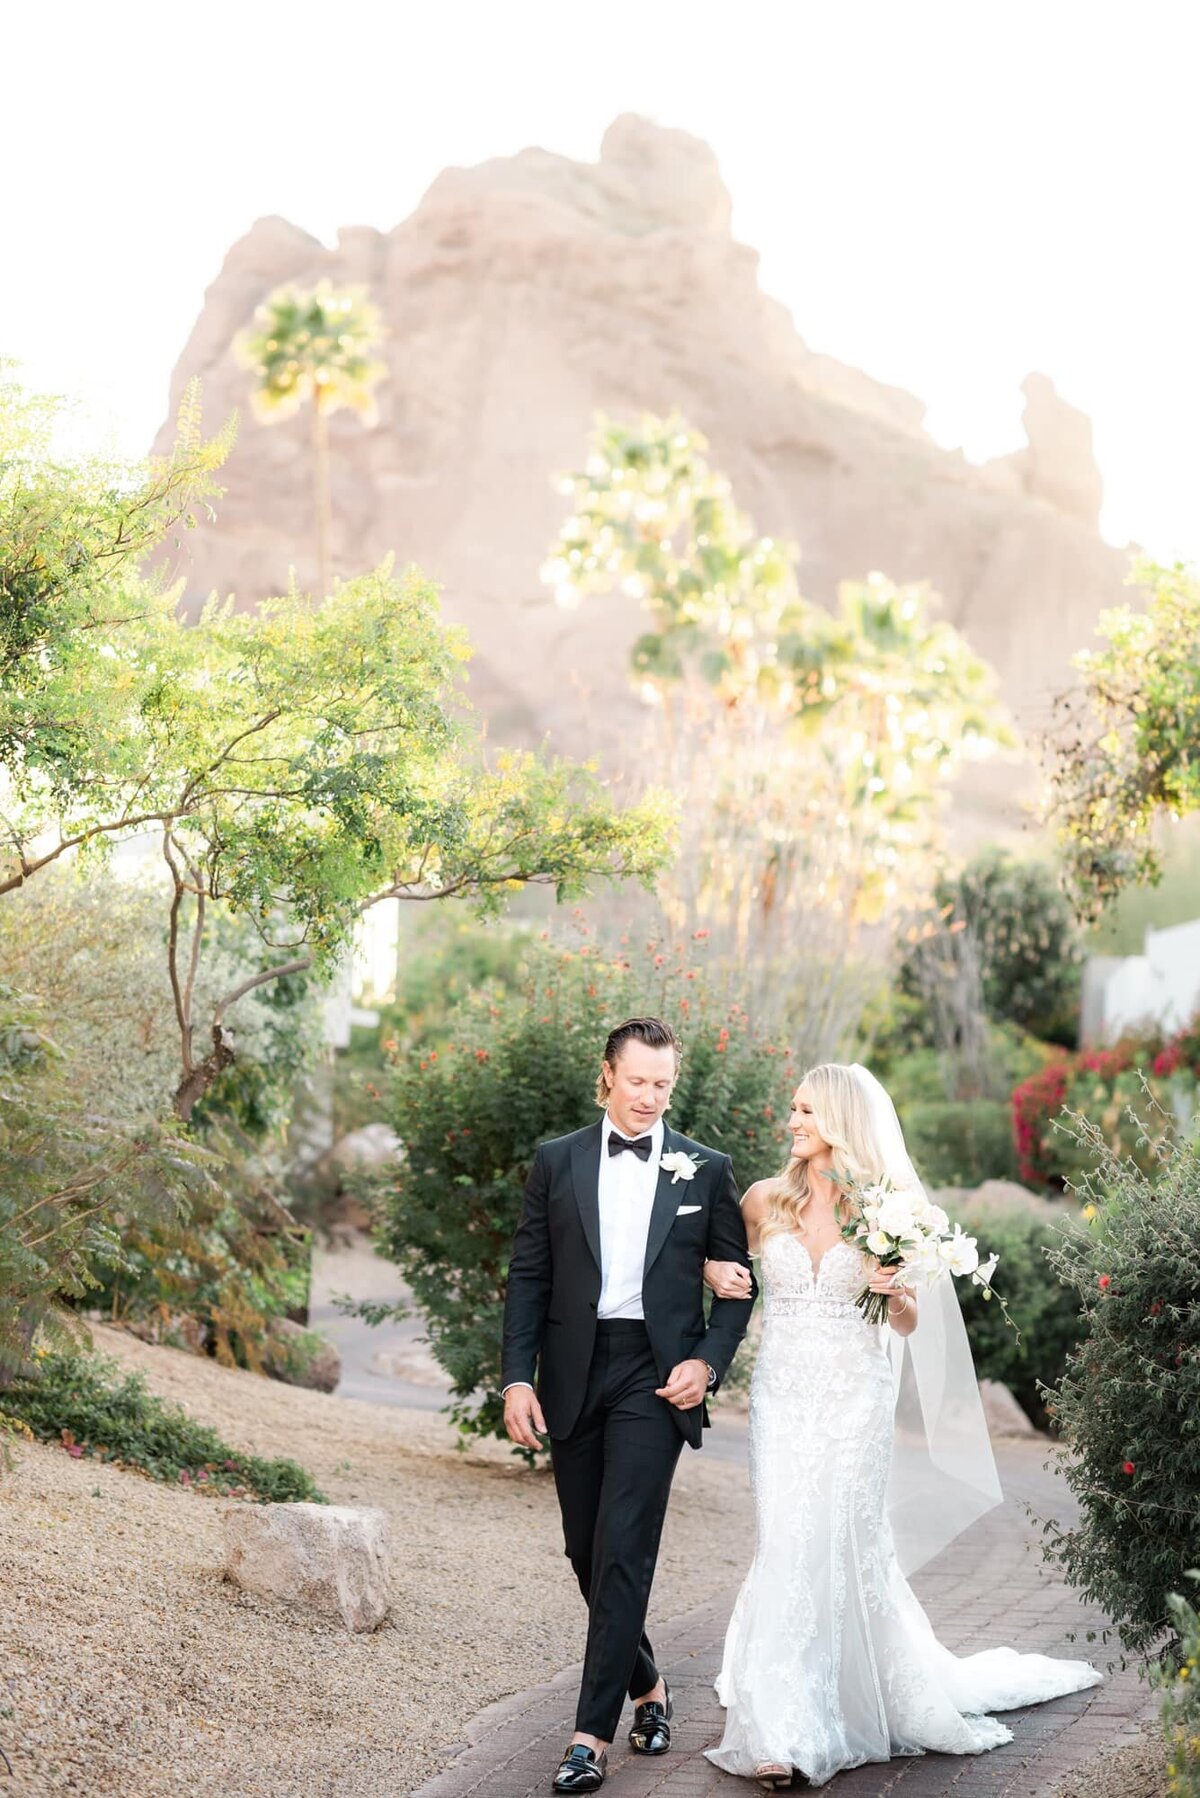 Bride and groom walking with mountain views behind them at a destination wedding